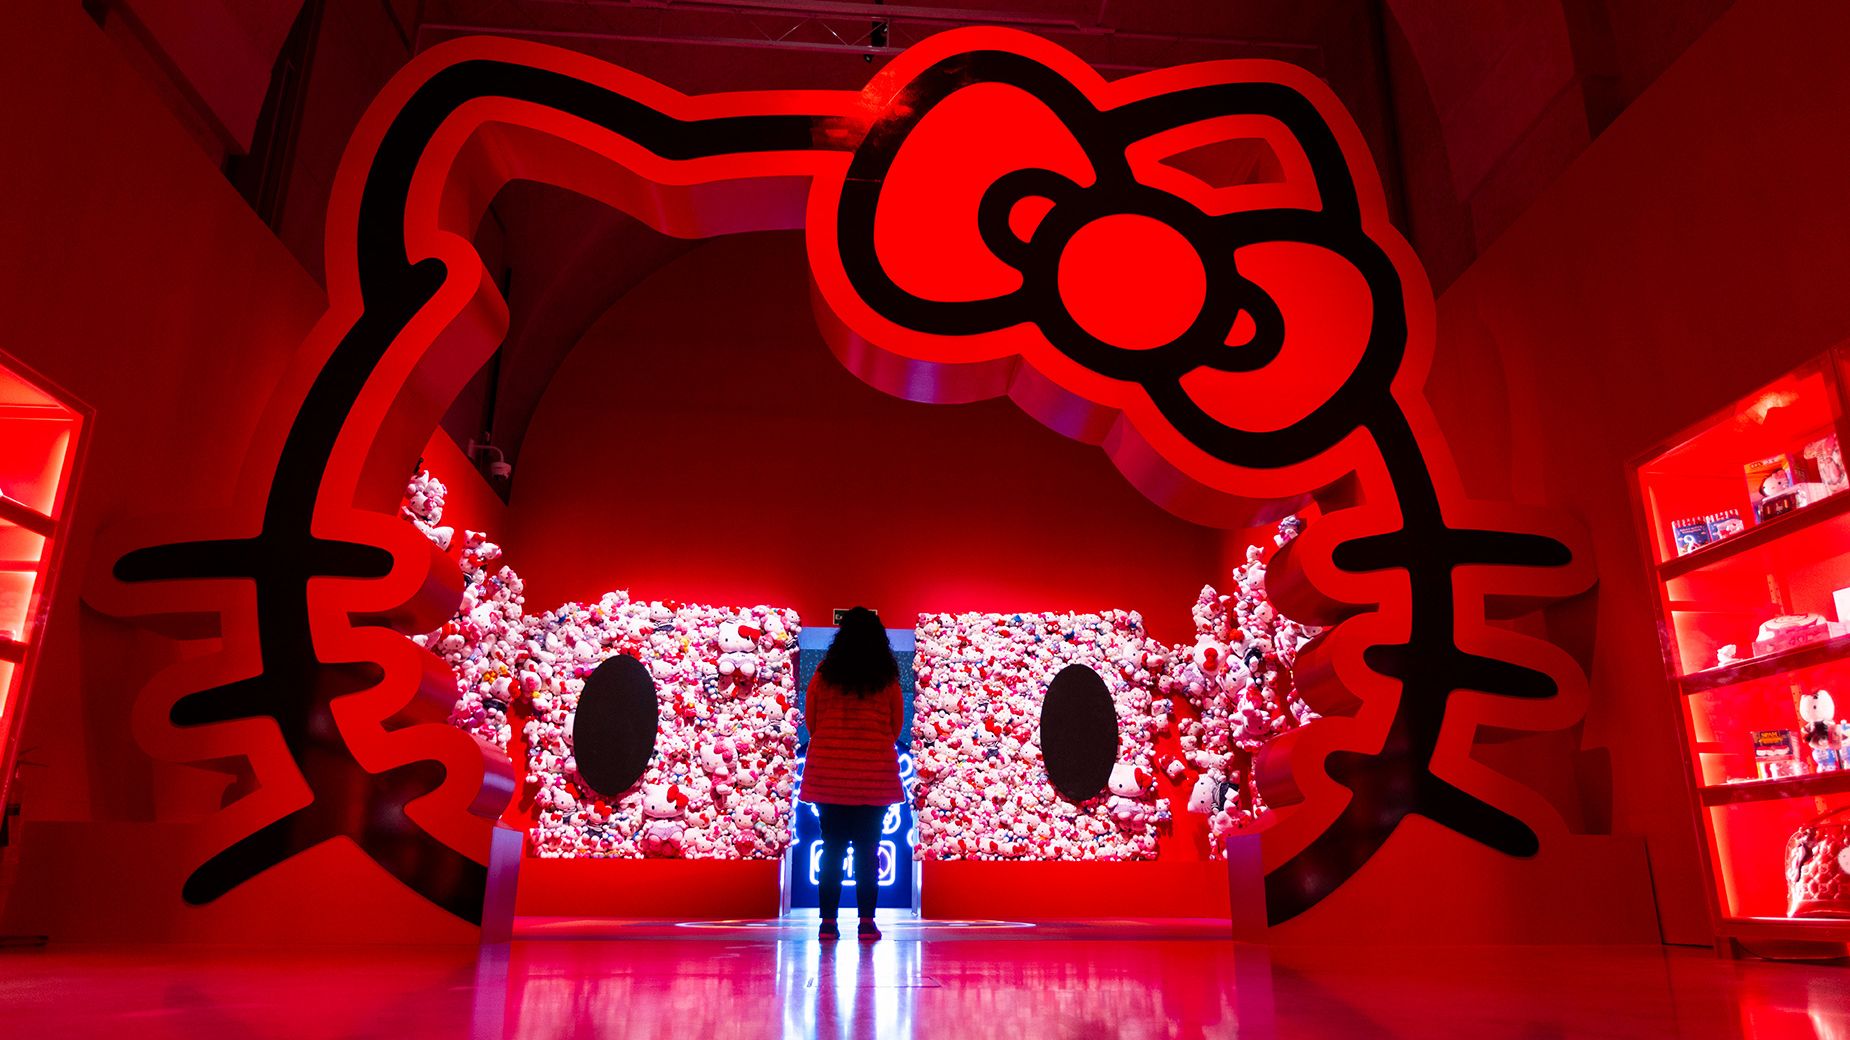 A Hello Kitty installation at Somerset House, London. The exhibition features artworks and cultural phenomena such as music, fashion, toys, video games and social media, to examine the world’s fascination with cute culture.